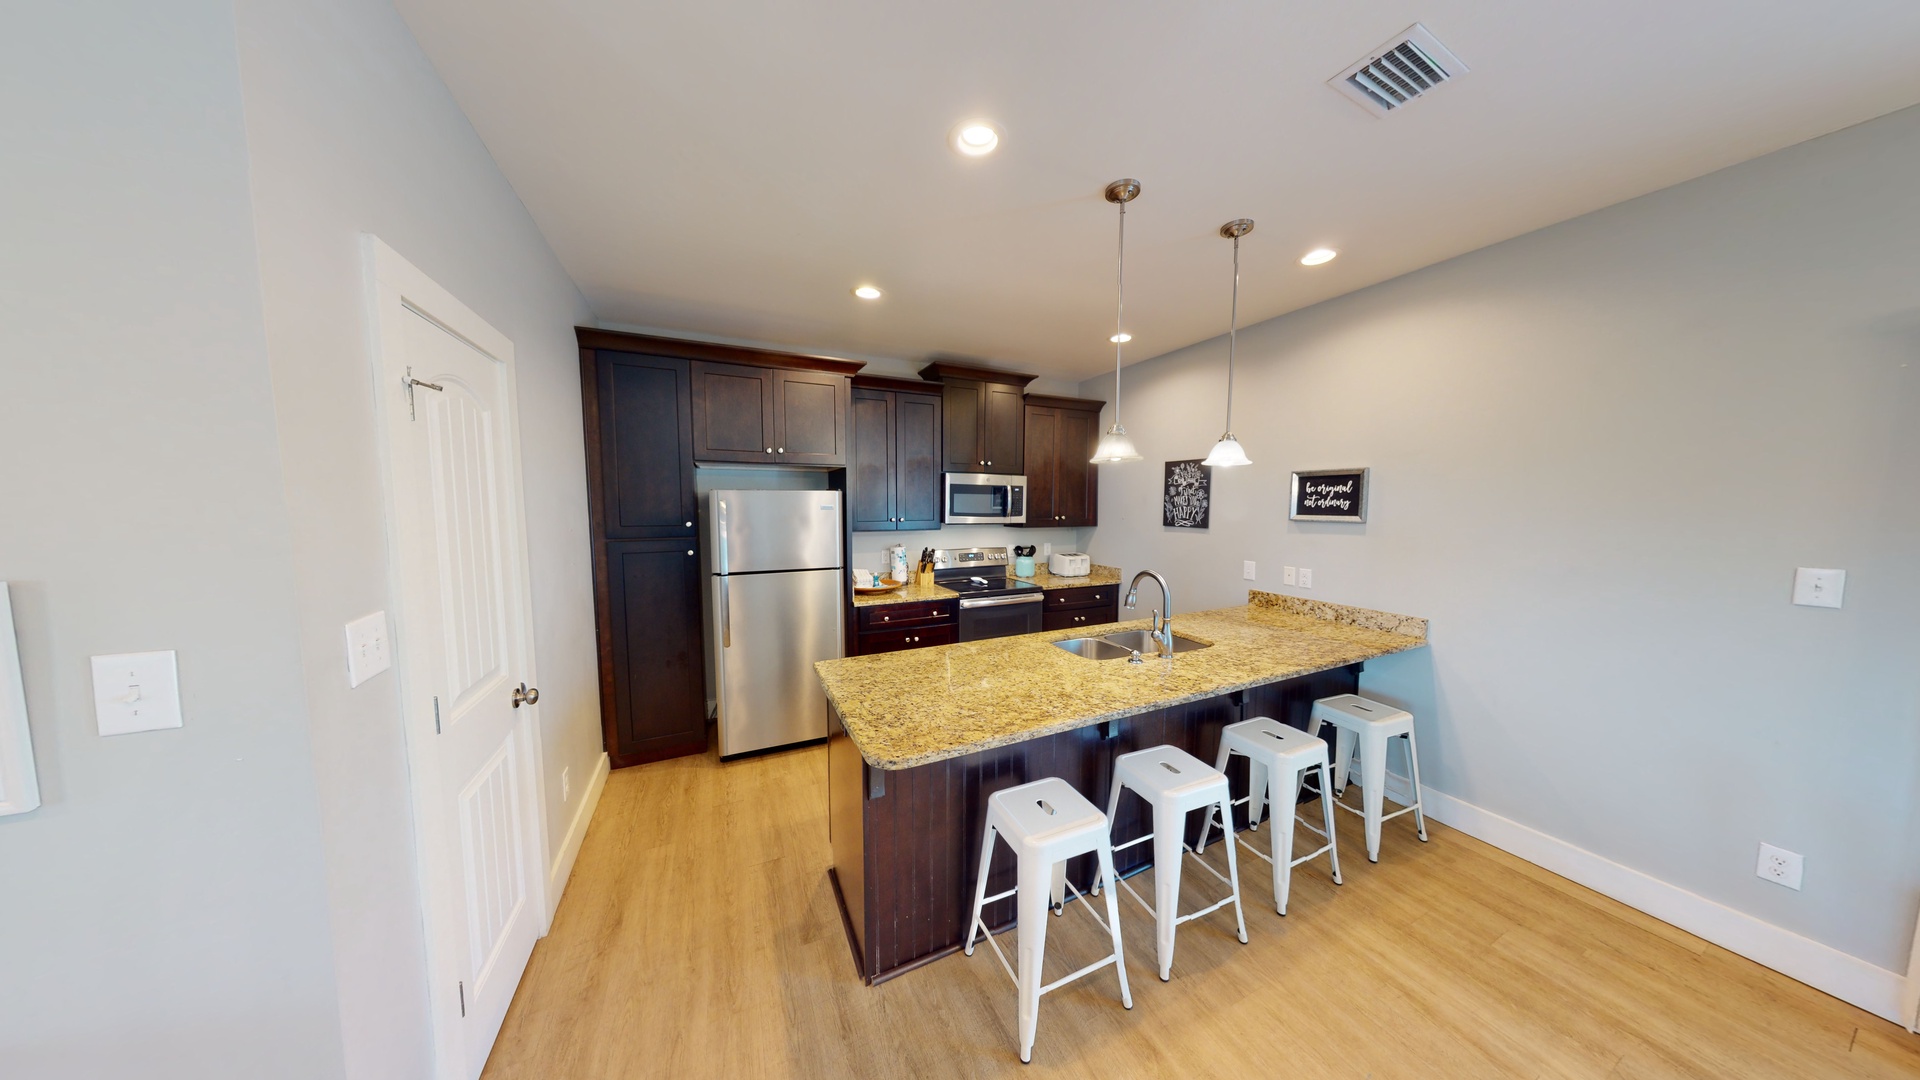 Fully equipped kitchen; island seating for 4